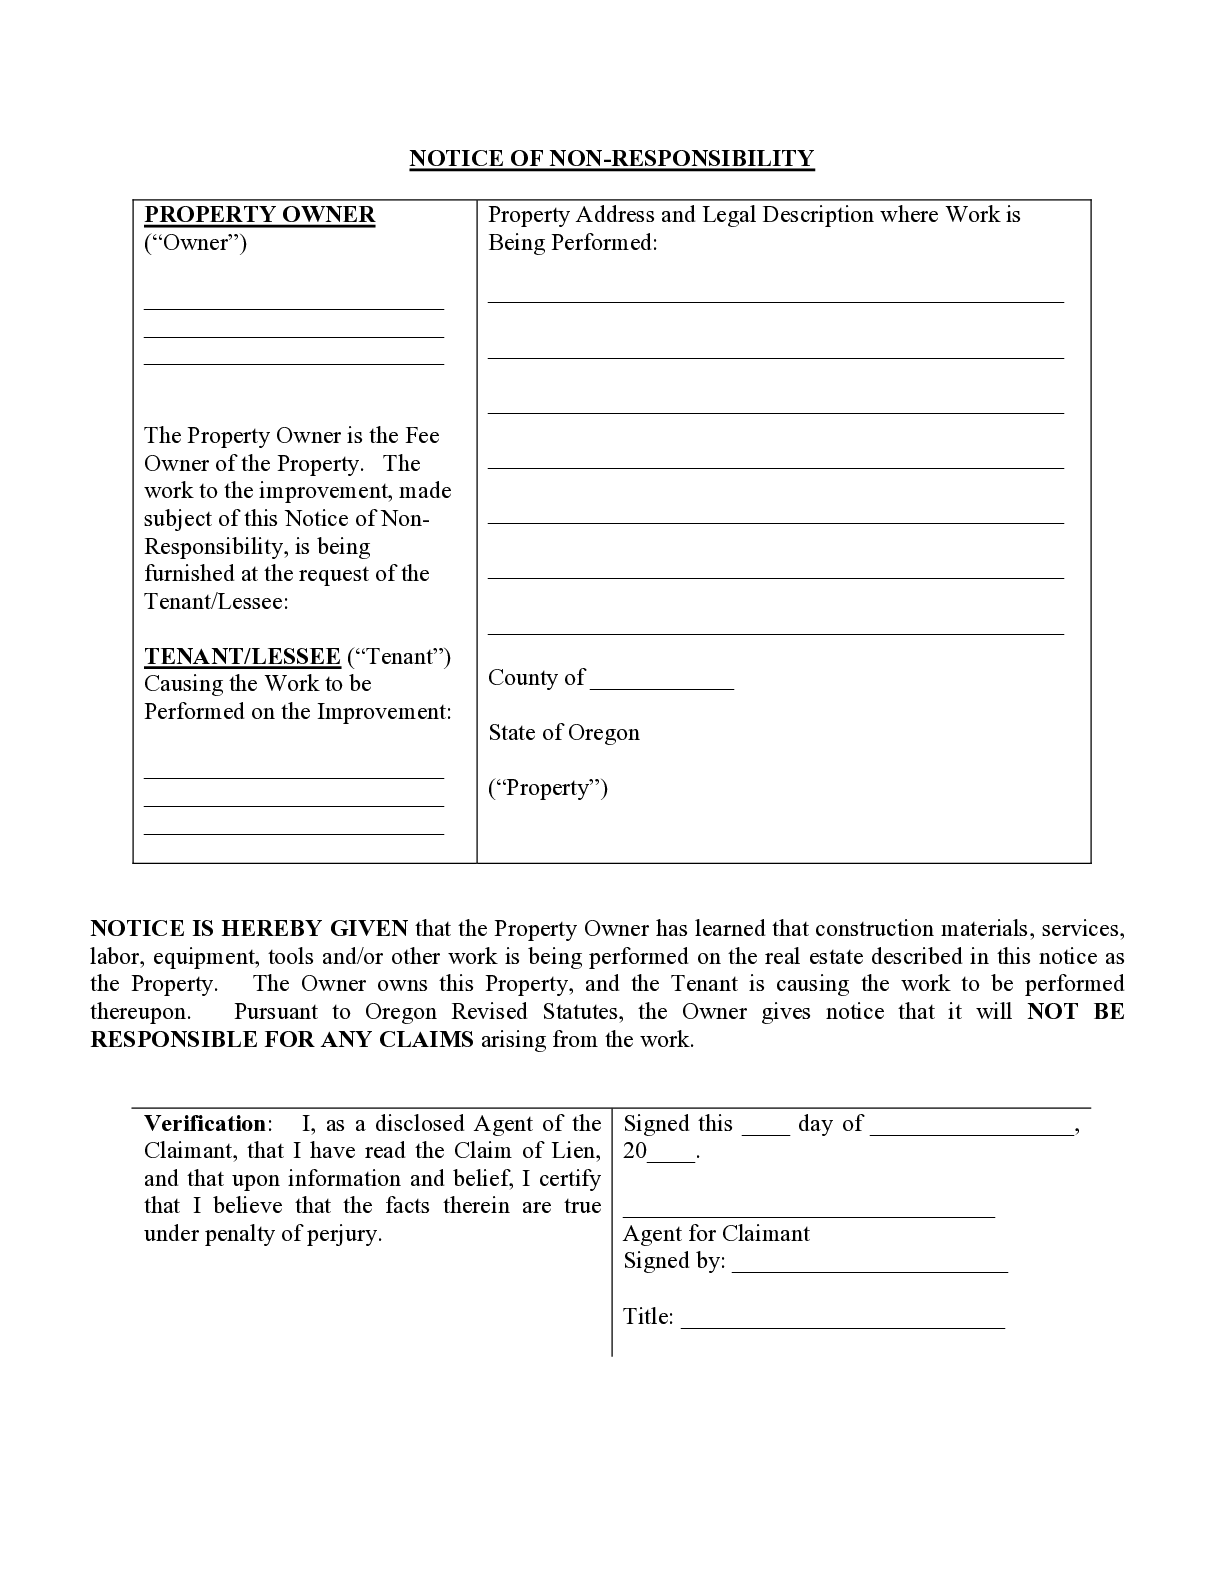 Oregon Notice of Non-Responsibility Form - free from